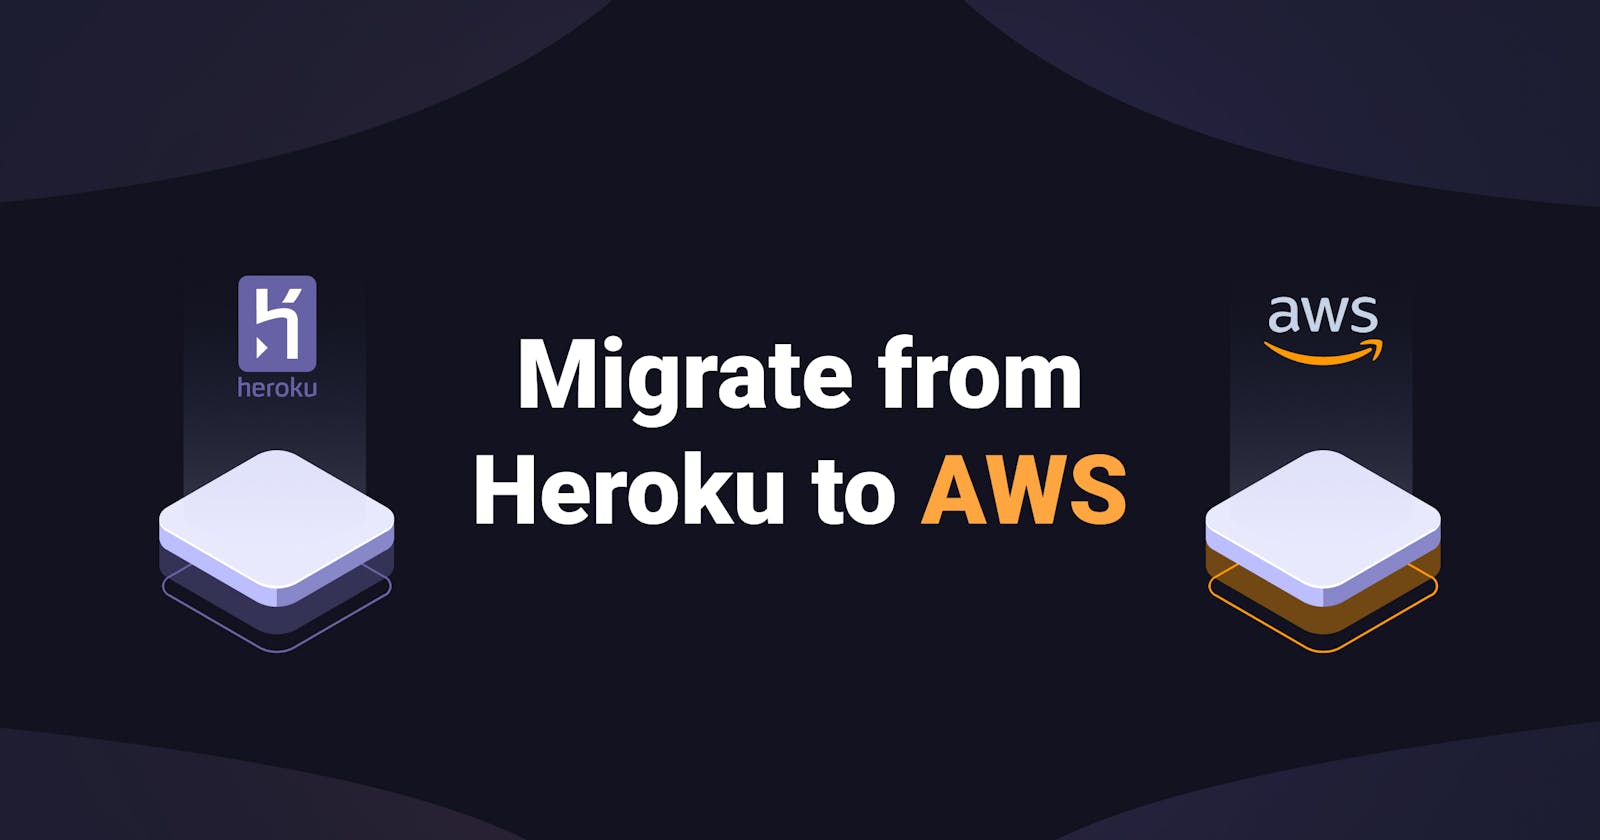 The ultimate guide to migrate from Heroku to AWS in 1 hour